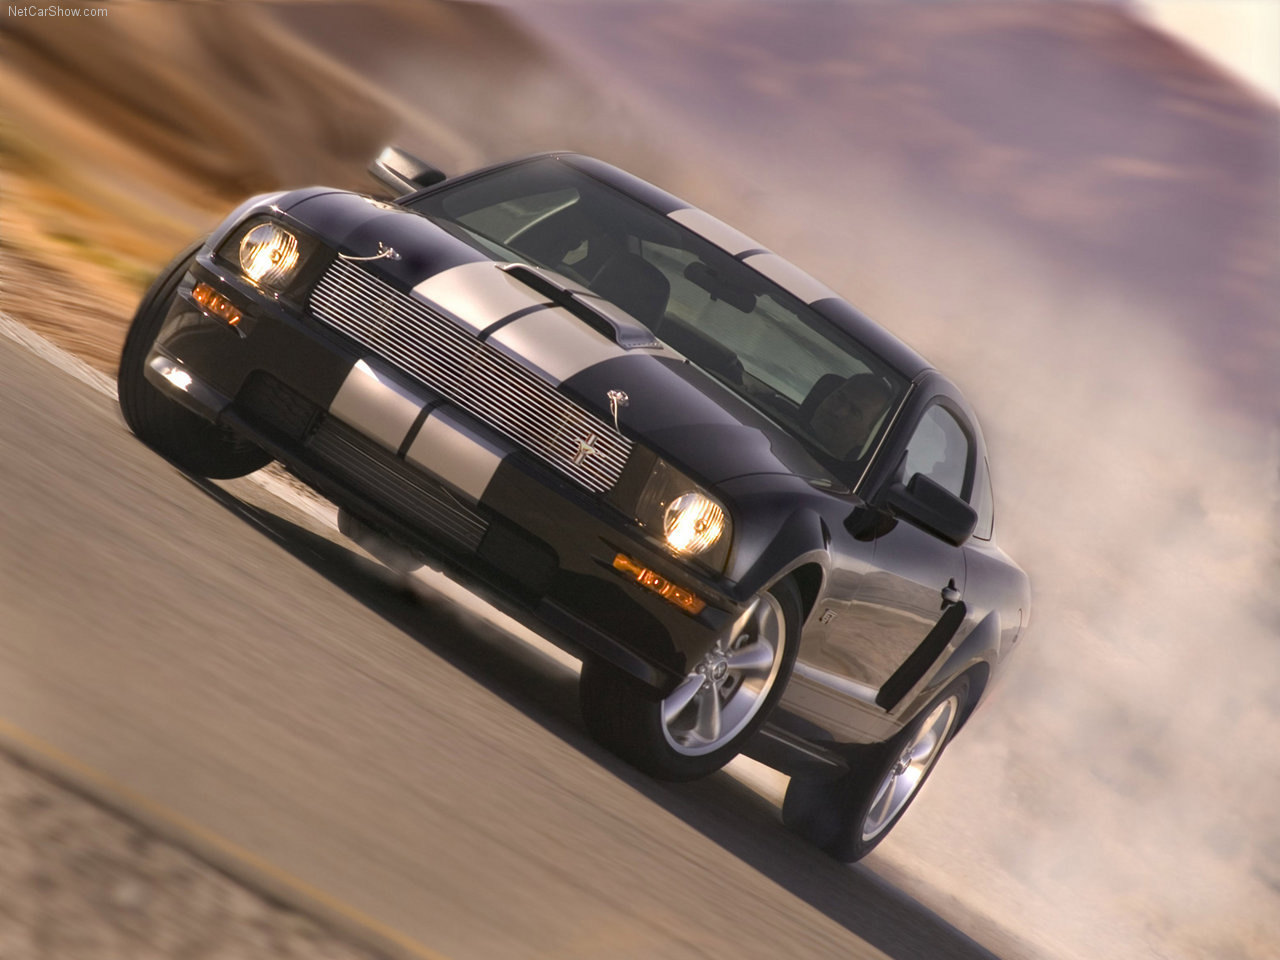 Ford-Mustang Shelby GT 2007 1280x960 wallpaper 01